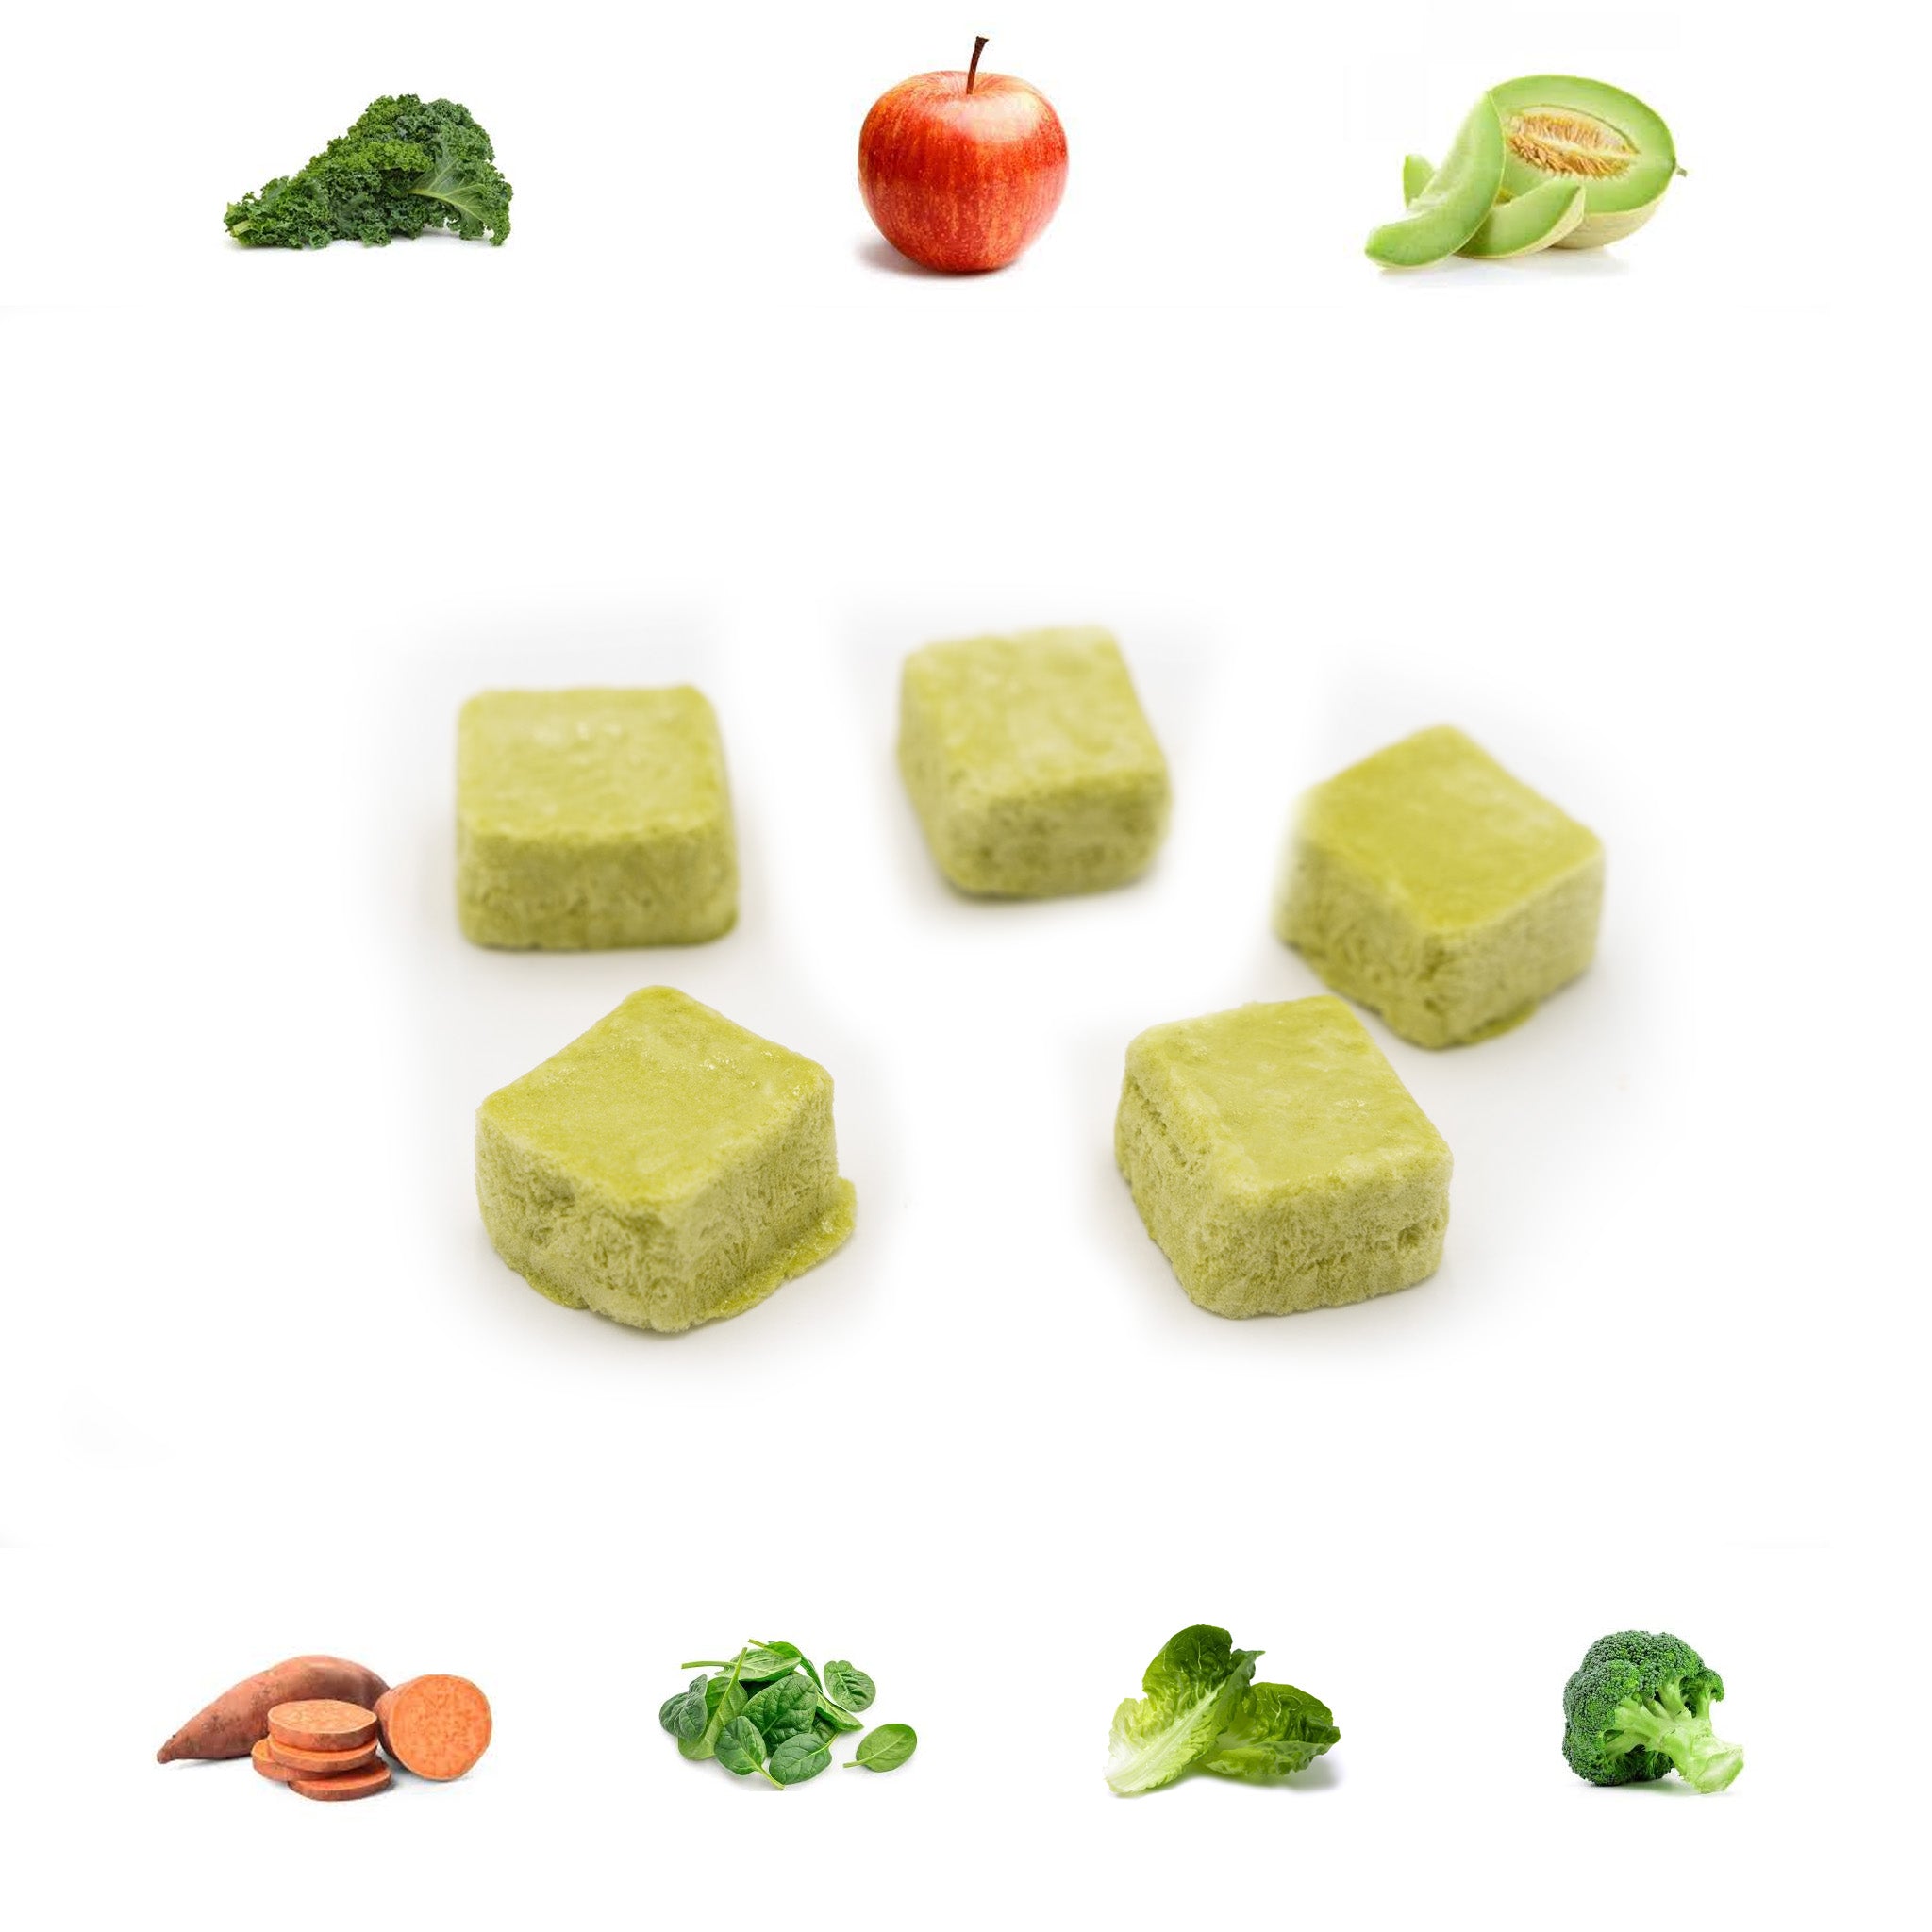 Freeze-Dried Fruit & Veggie Cubes (Kale) | Made with Real Kale, Apple, Honeydew Melon, Broccoli, Lettuce, Spinach, Sweet Potato